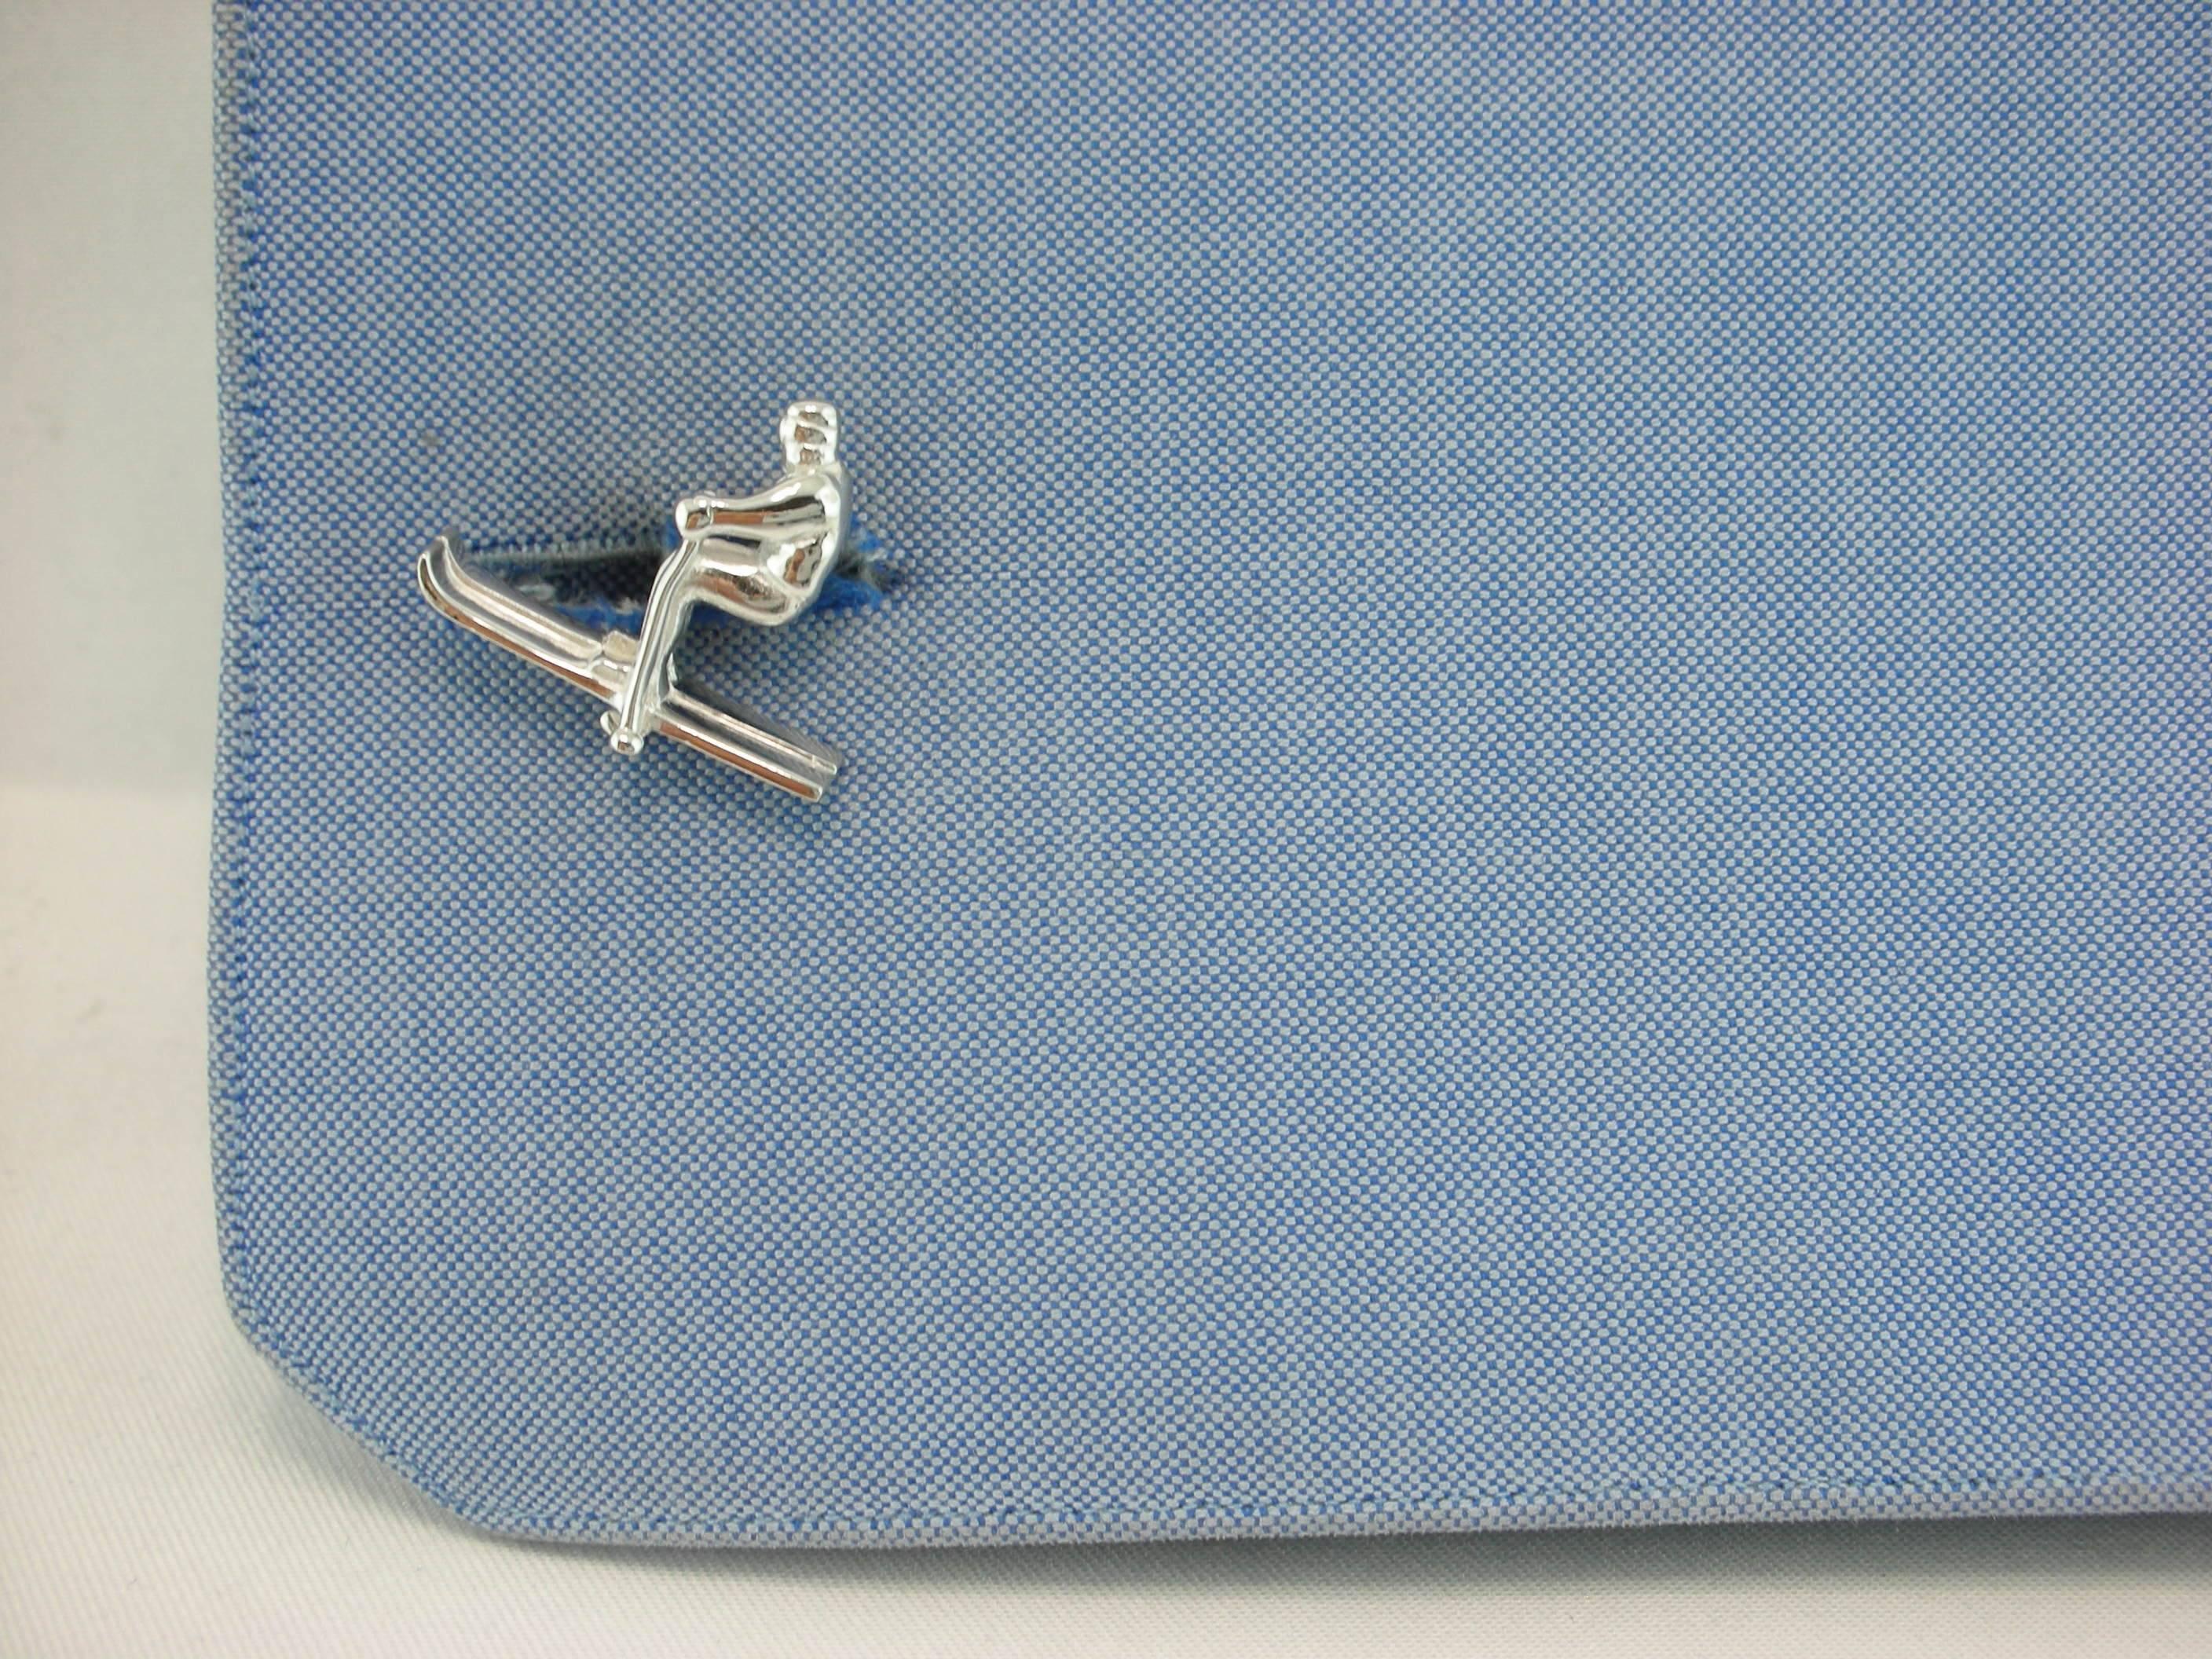 Jona Design collection, hand crafted in Italy, rhodium plated sterling silver cufflinks. Marked 